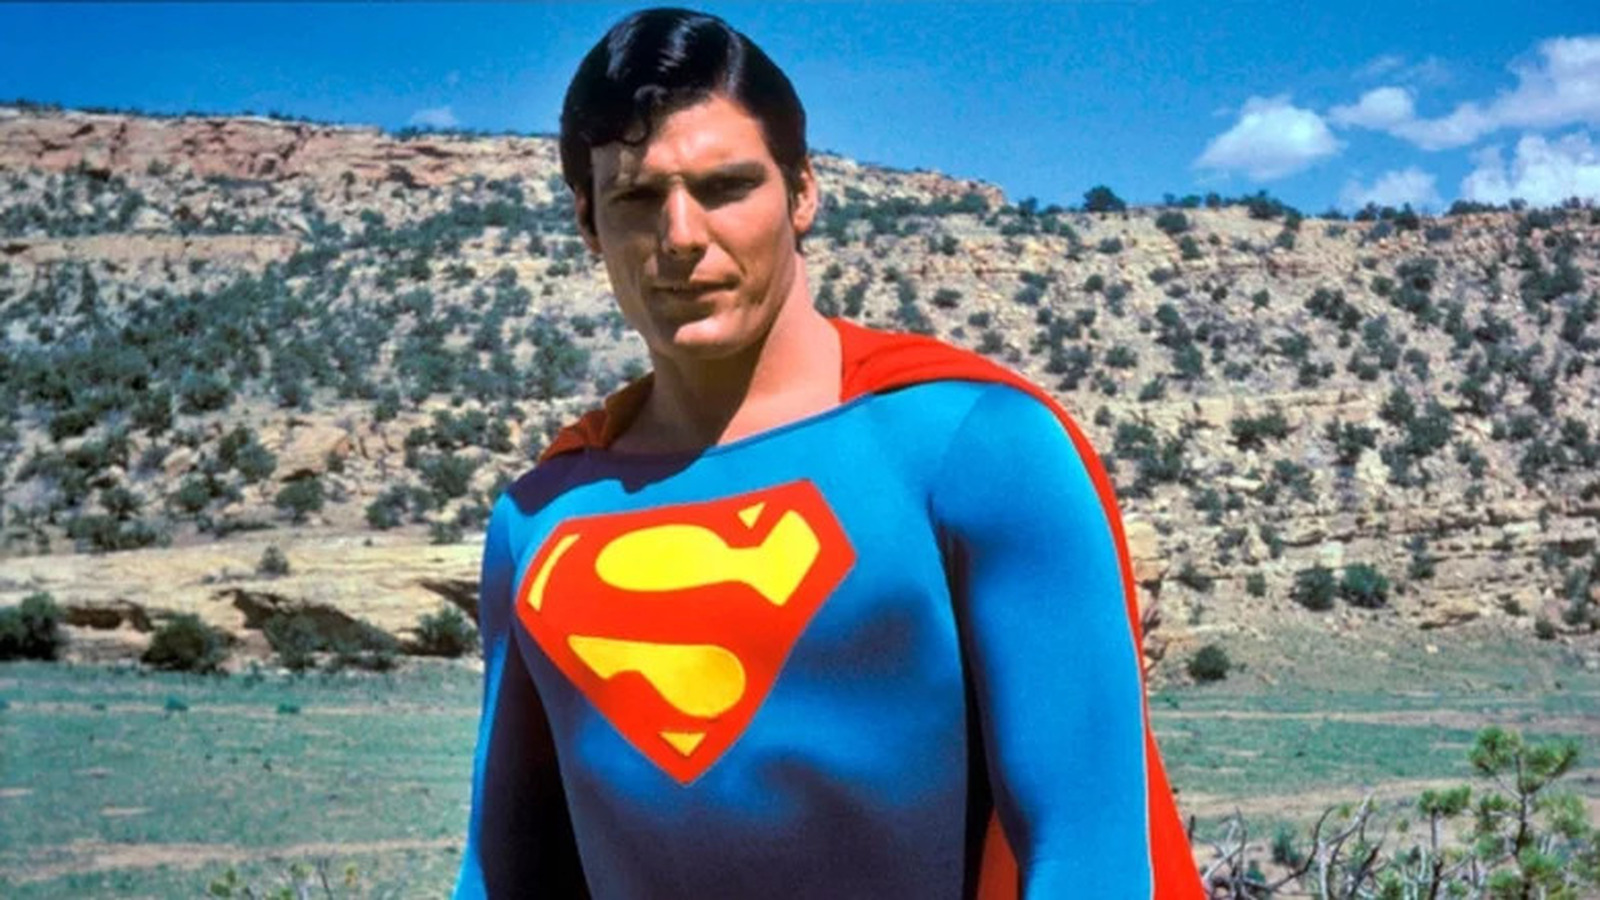 Christopher Reeve's Superman performance prompted Robin Williams to play Popeye